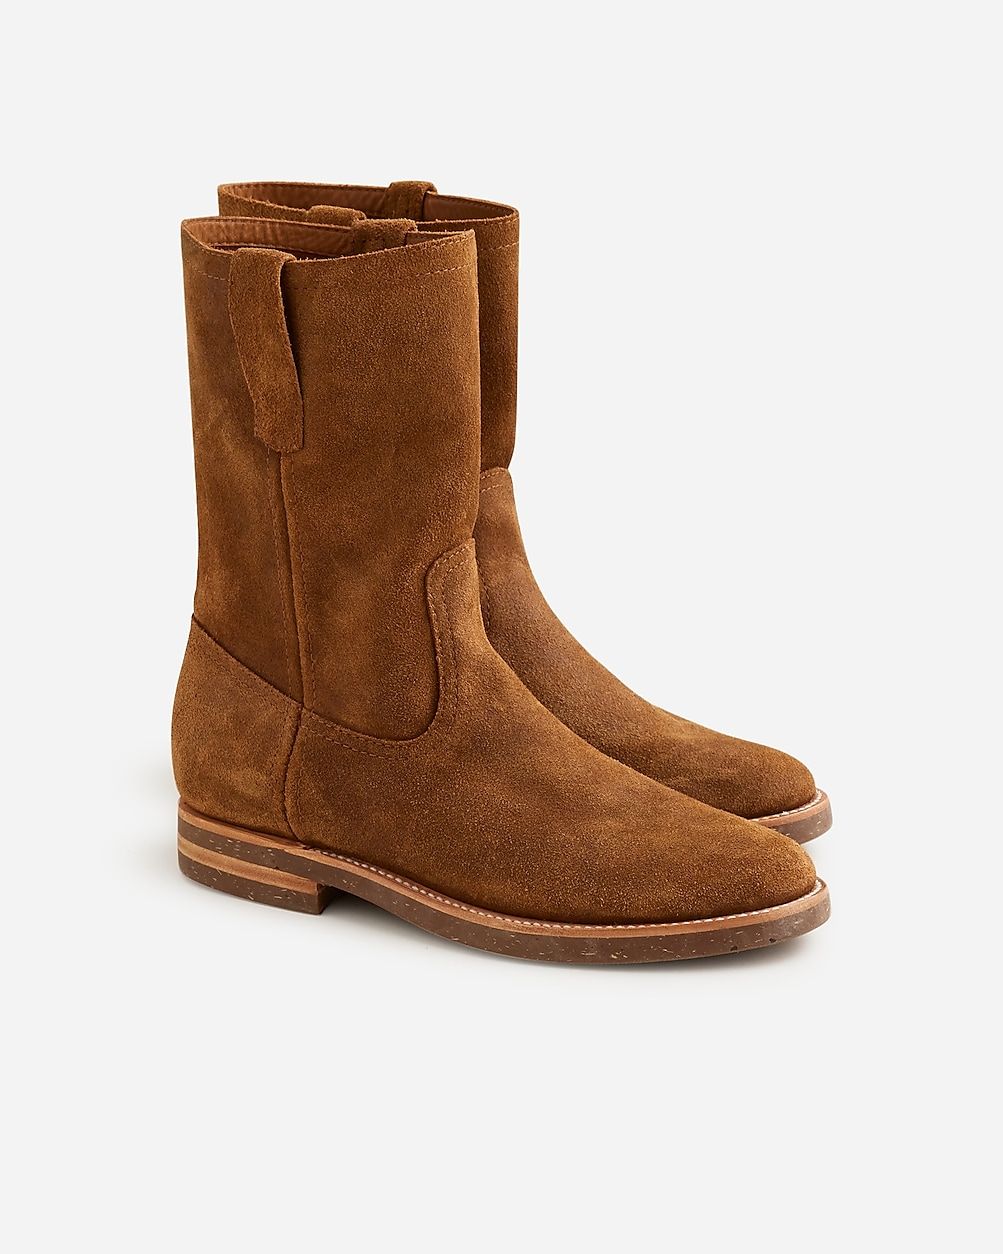 Hambleton X J.Crew Roper boots in roughout suede | J.Crew US